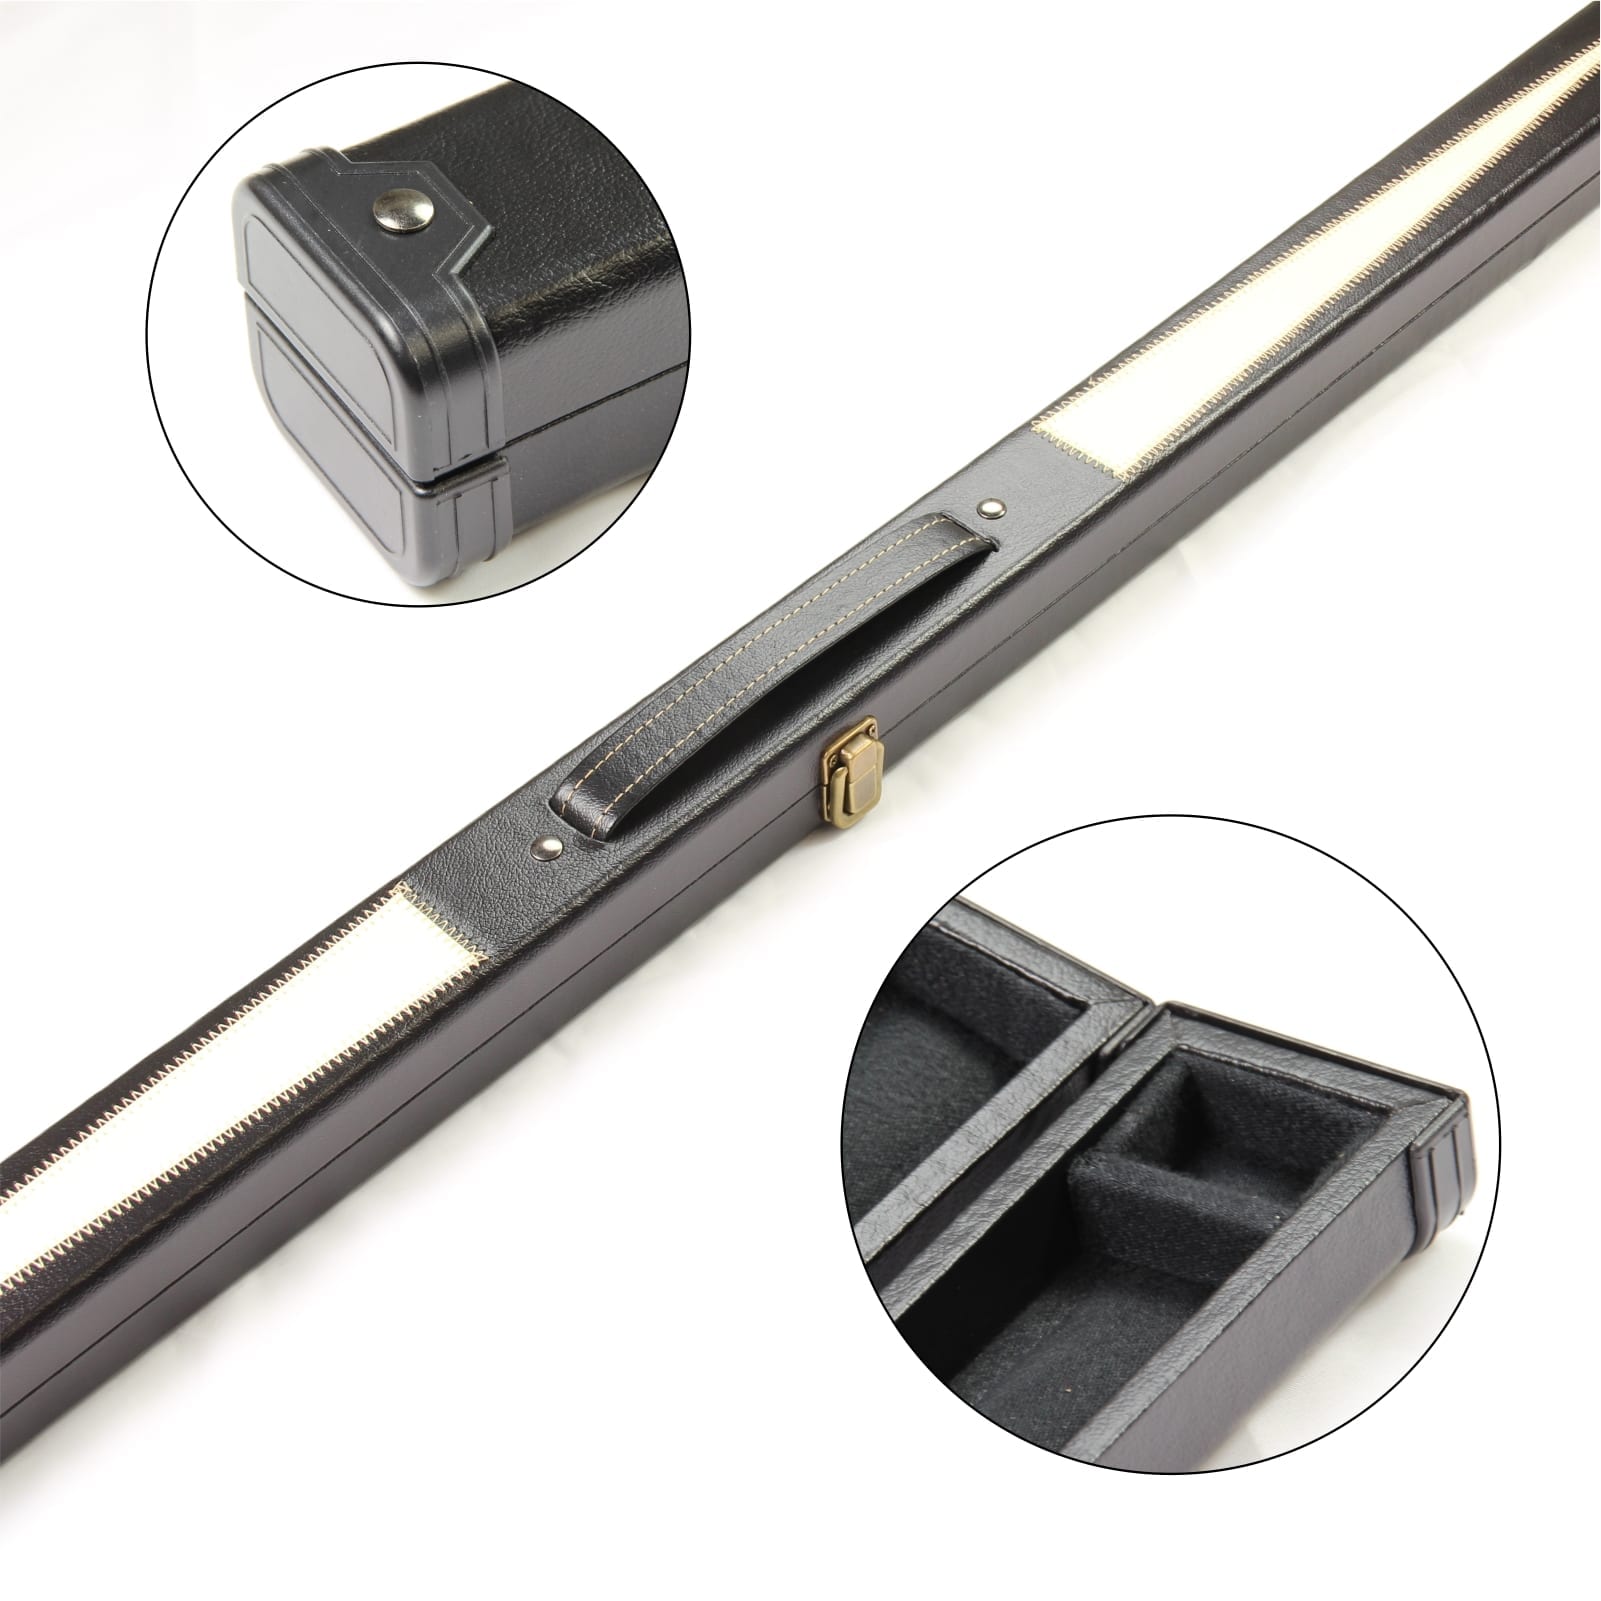 WHITE STAR 1 Piece Snooker Pool Cue Case - 149cm Max Cue Length